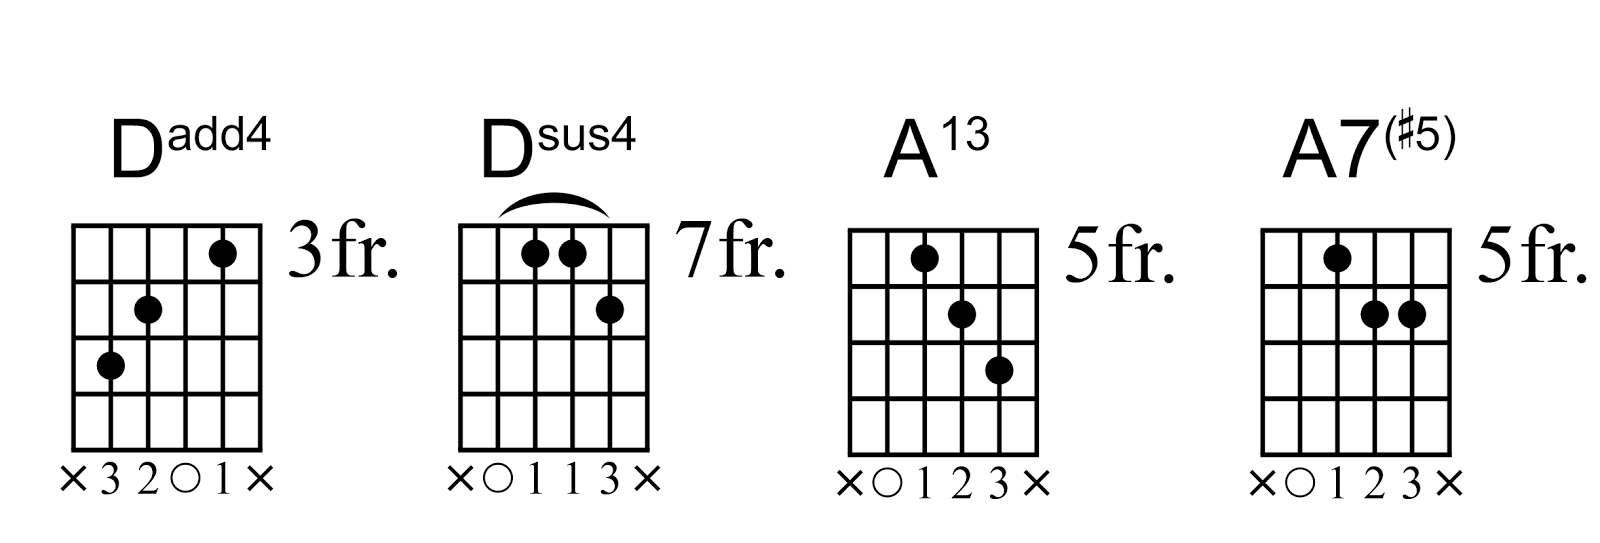 Guitar Chords from Good to Spectacular.